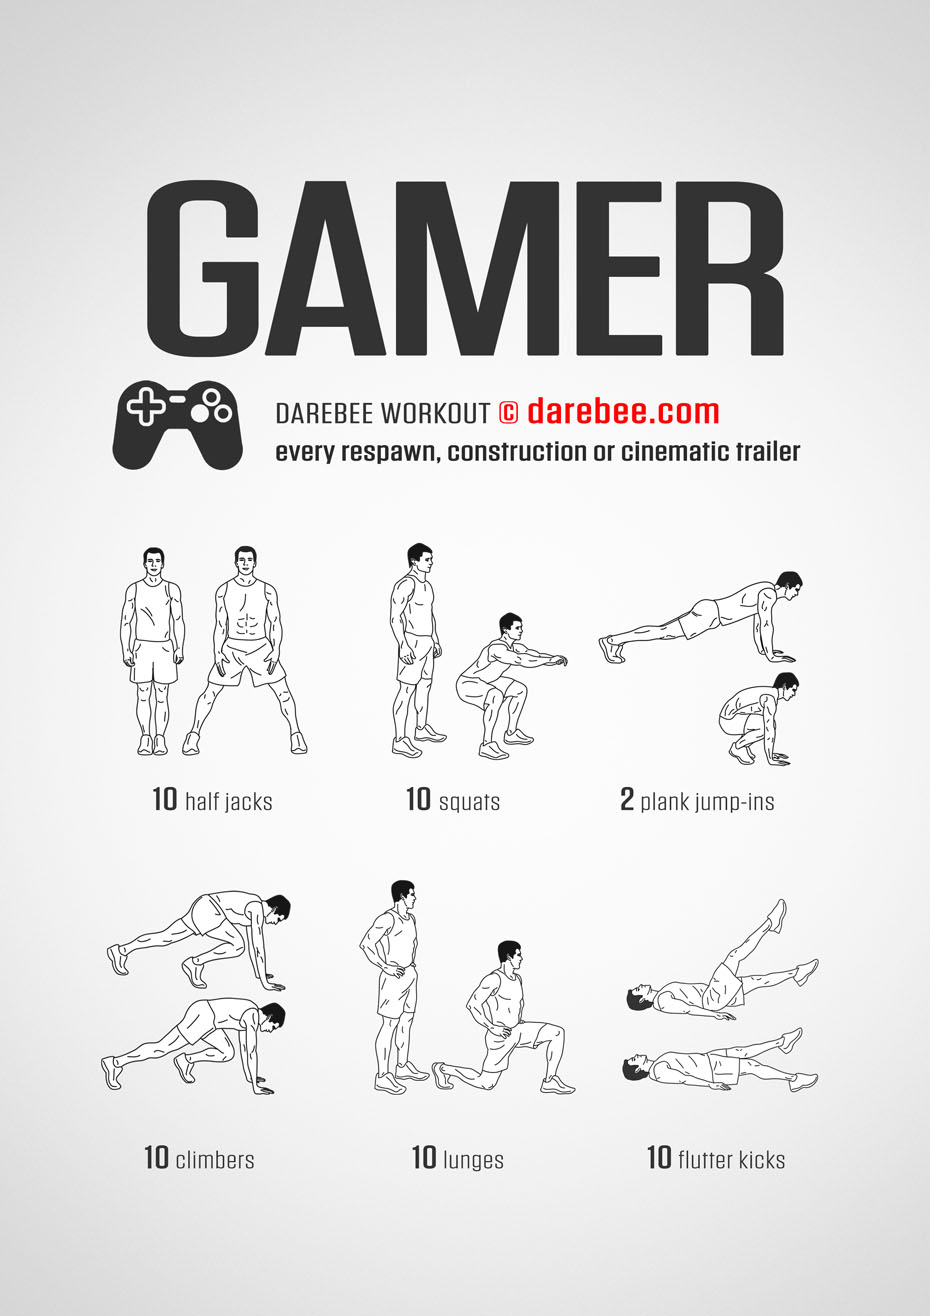 10 exercises you can do while playing video games